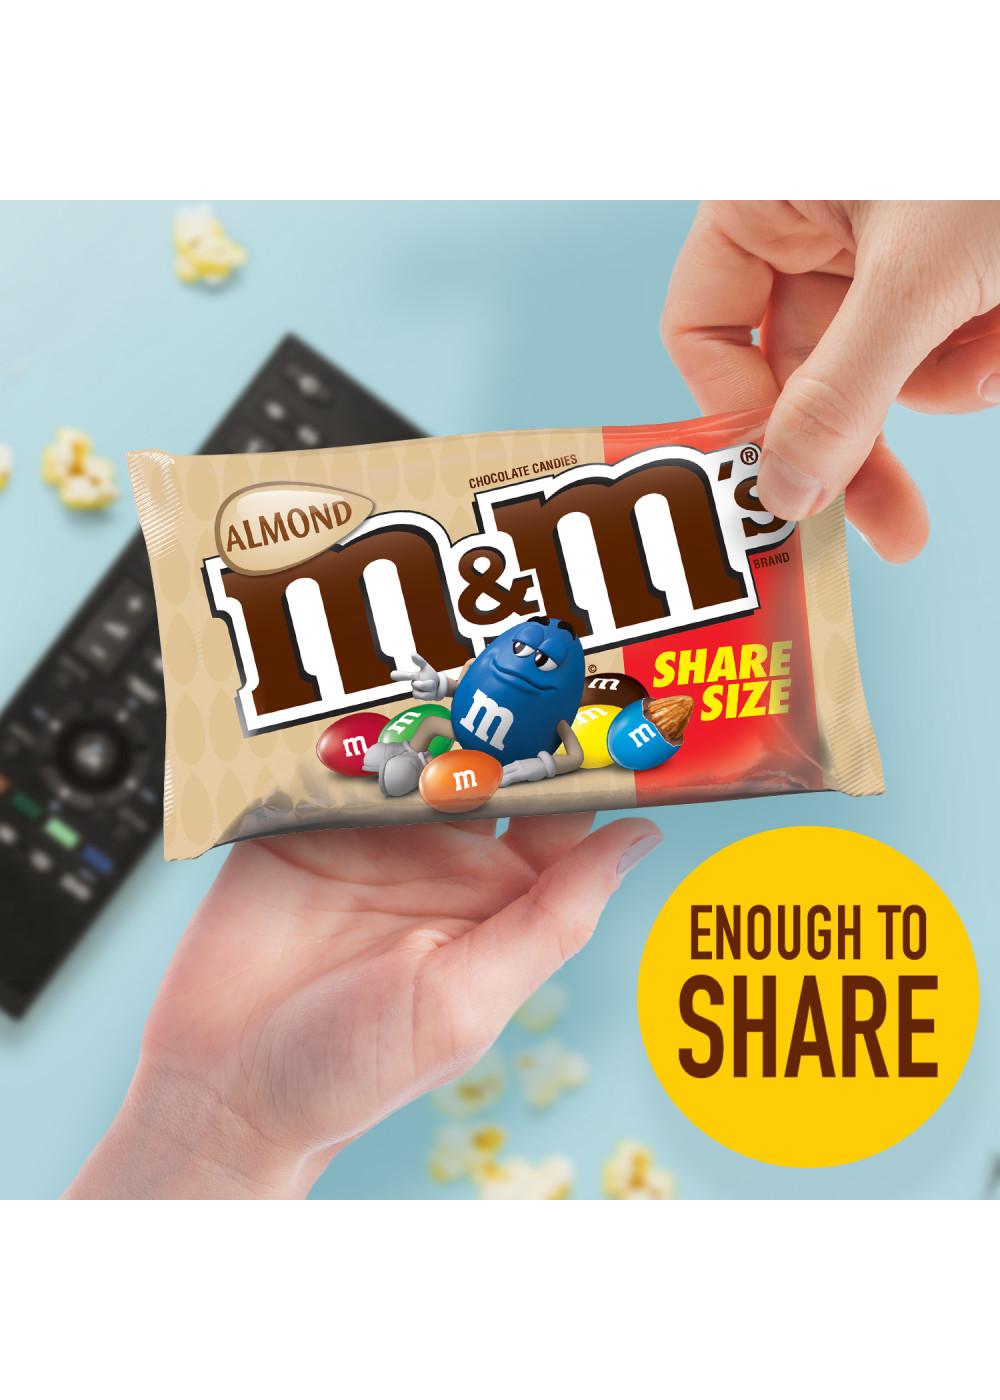 M&M'S Almond Milk Chocolate Candy - Share Size; image 4 of 7